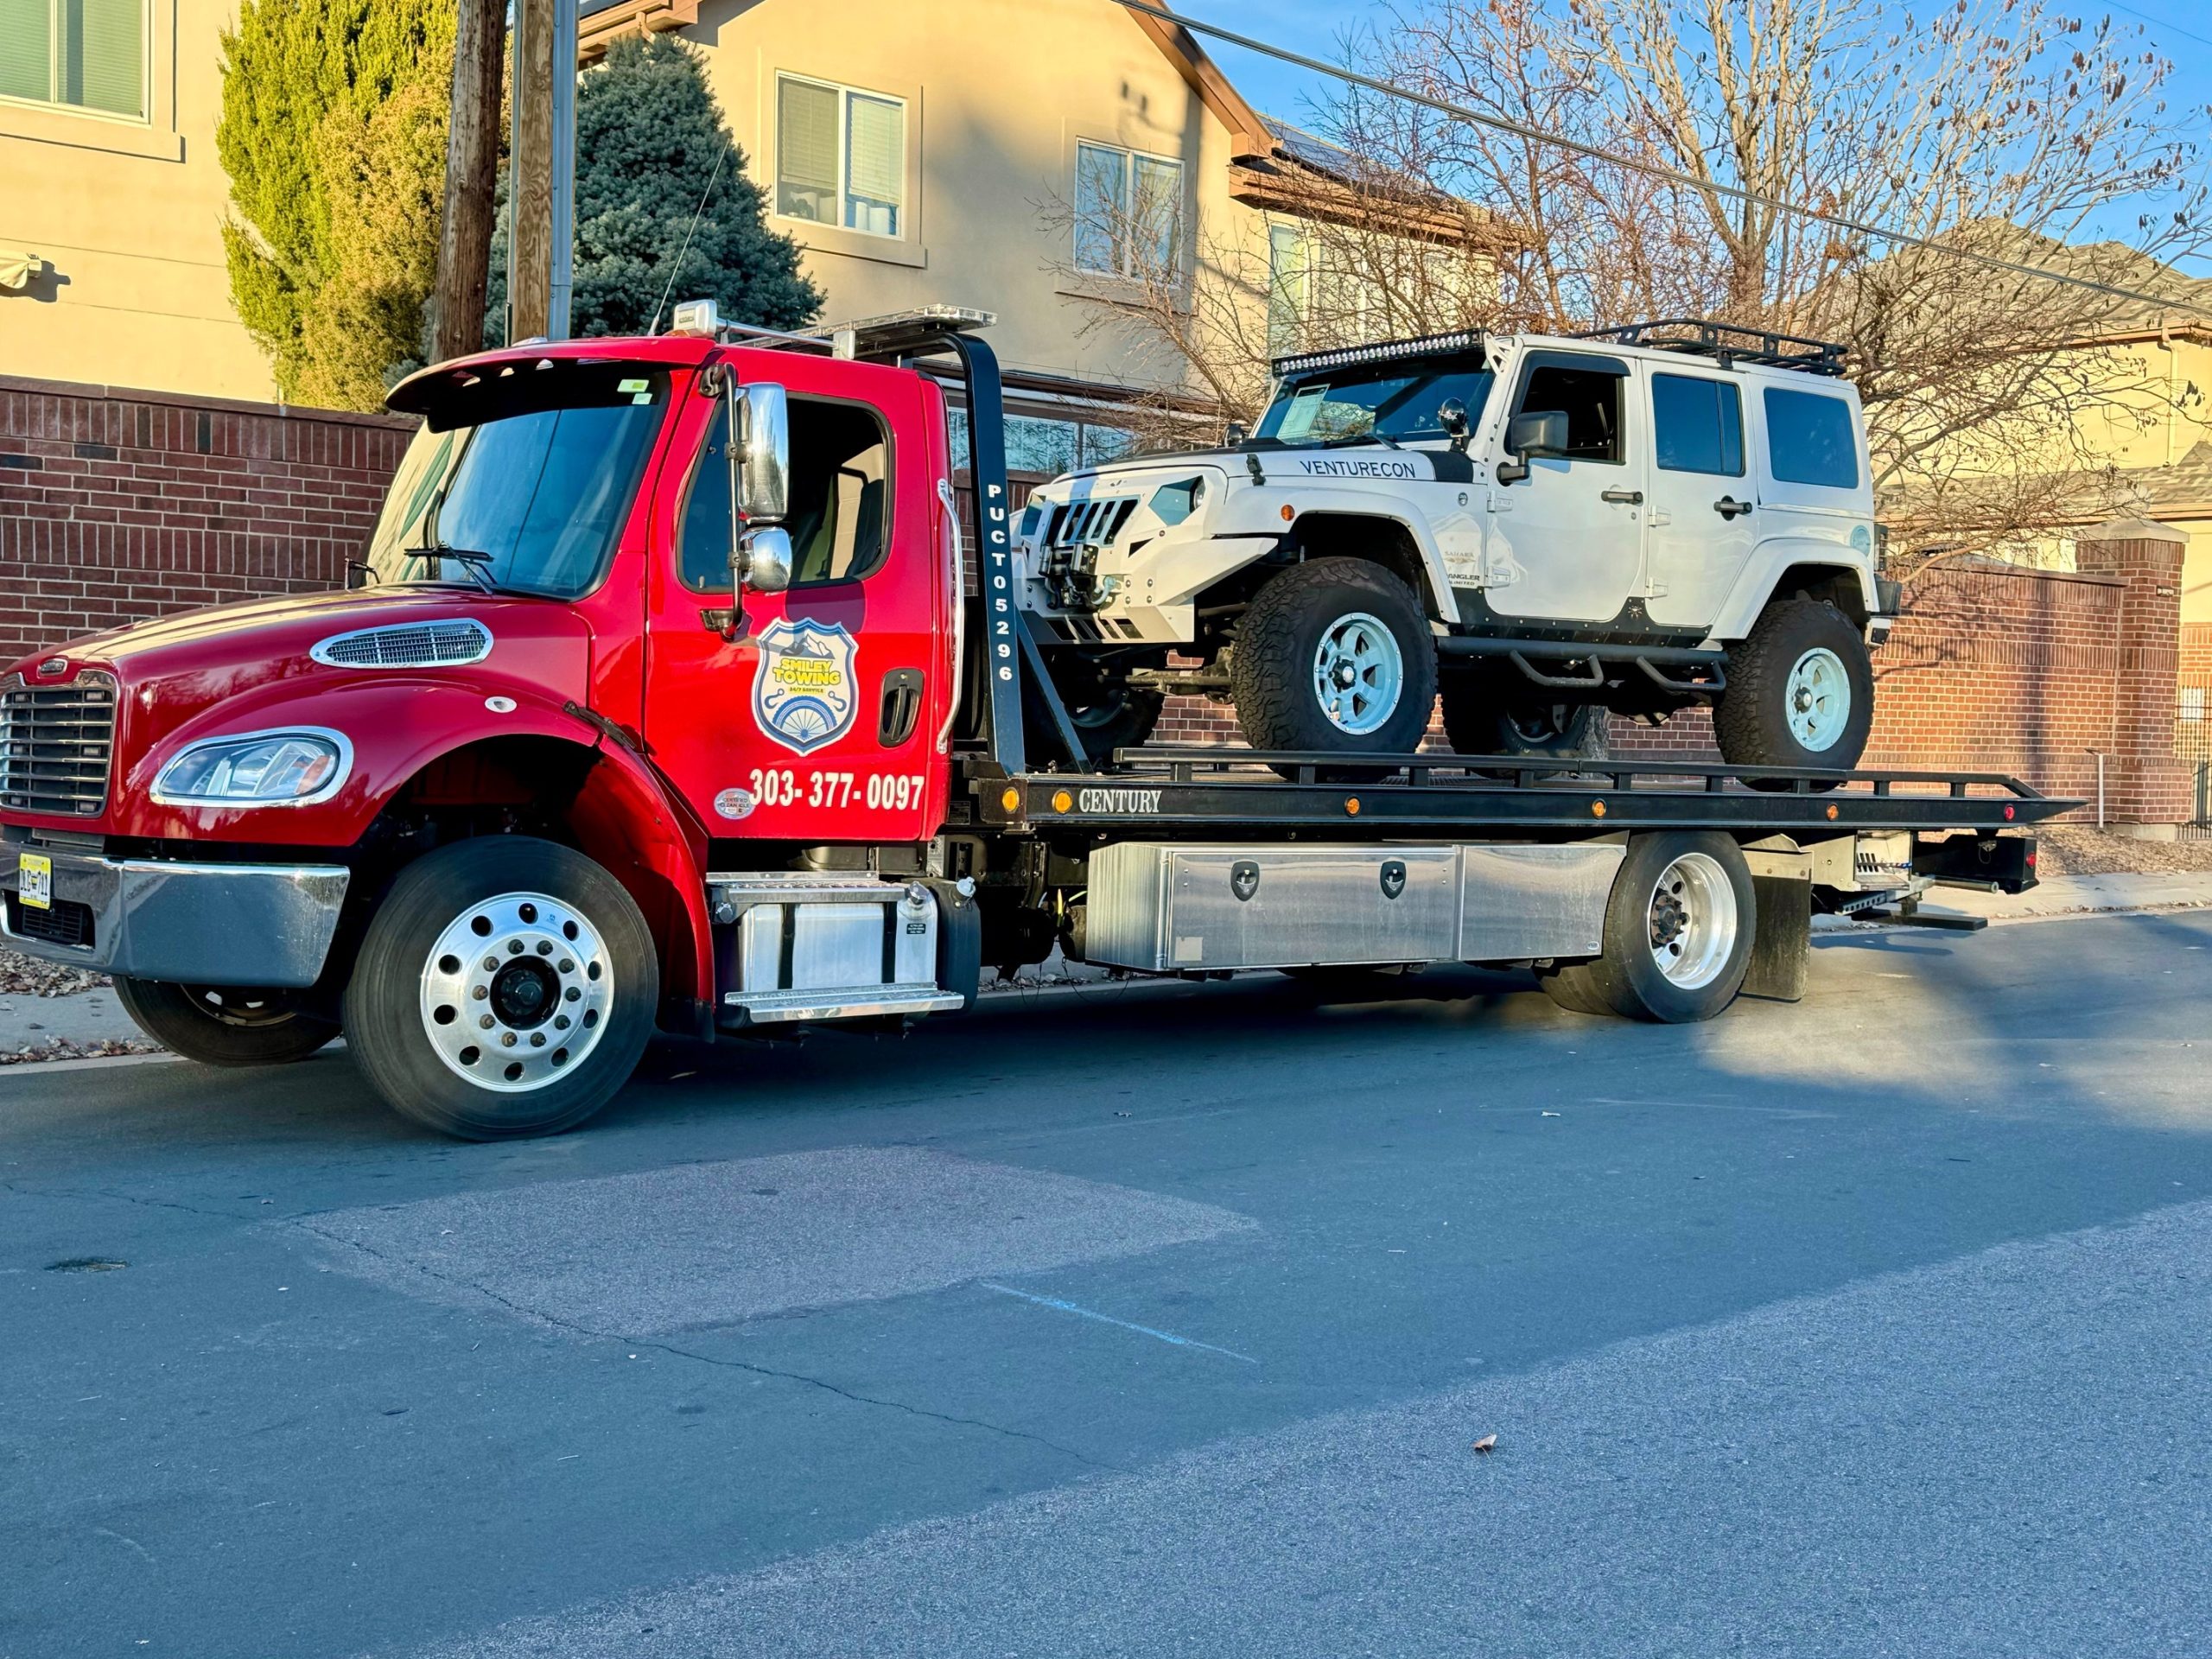 this image shows towing services in Arvada, CO